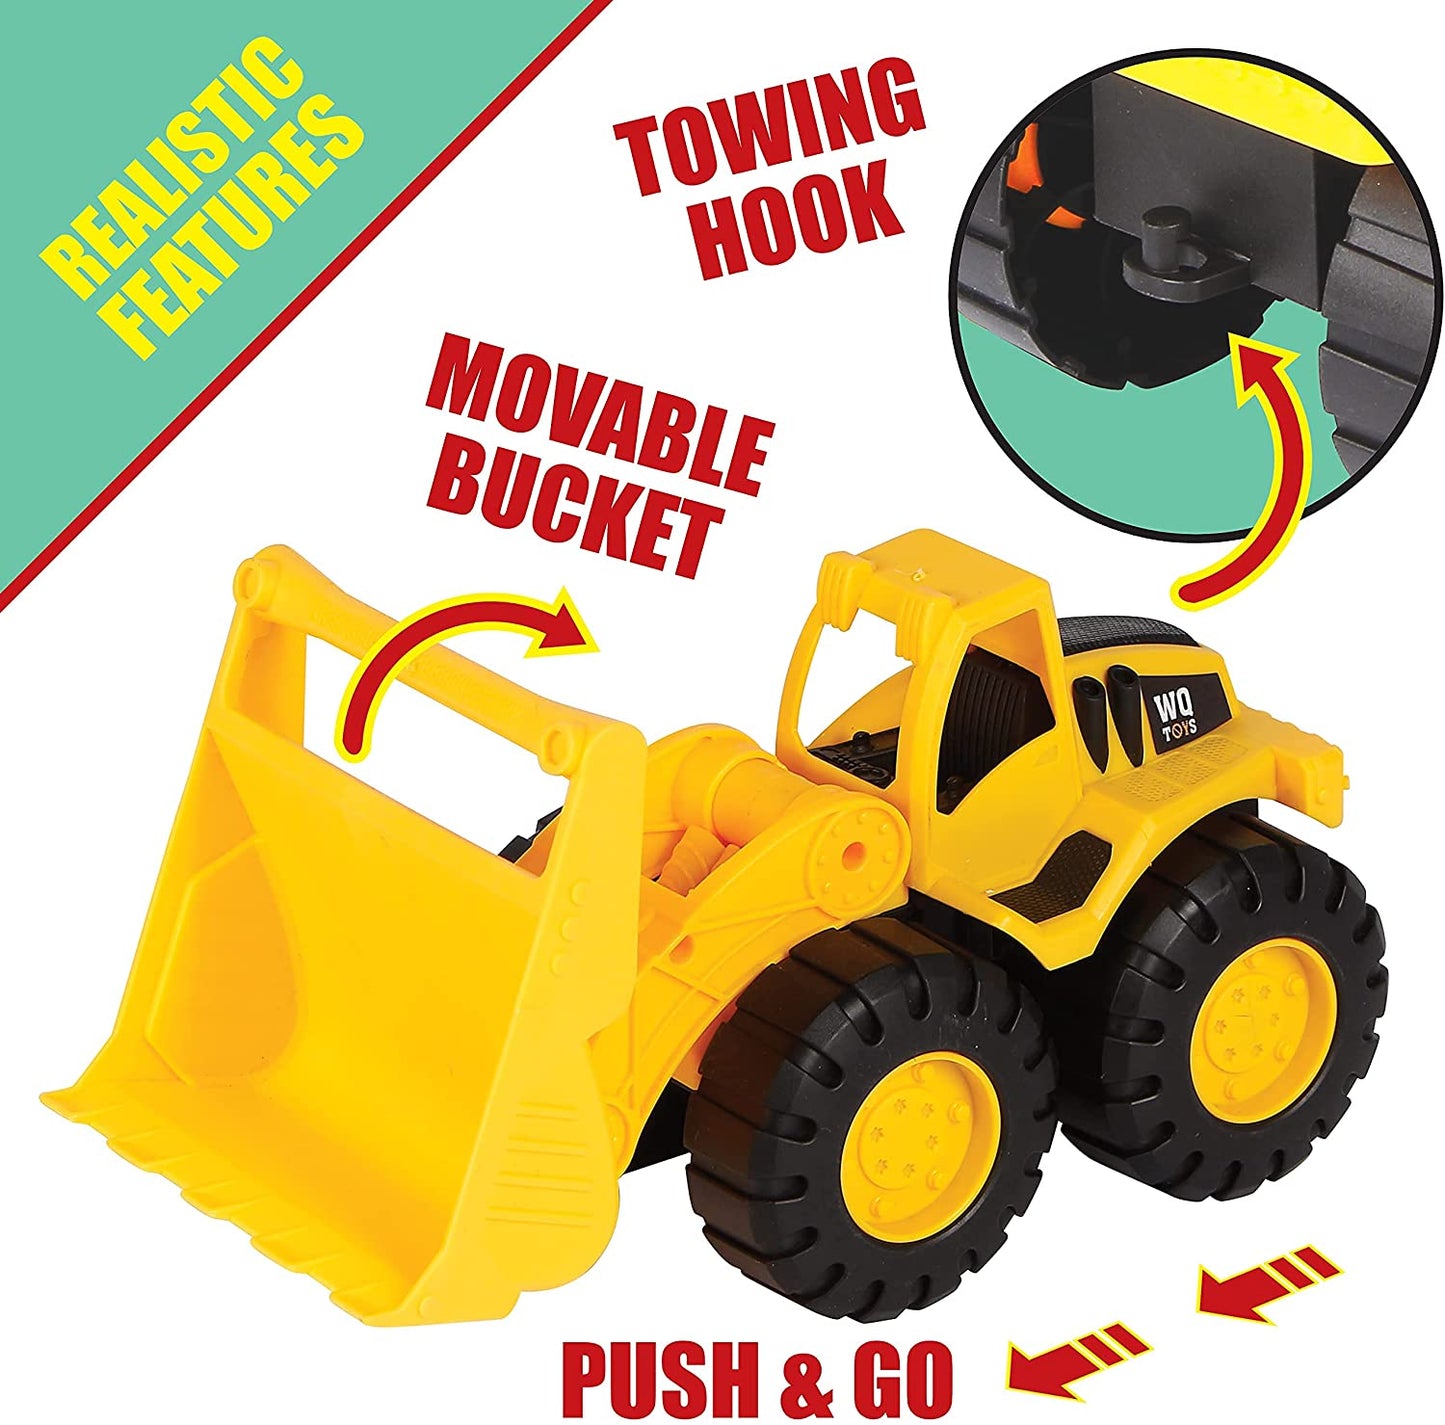 Flatbed Truck with Excavator Tractor | 2 Trucks with Accessories Toy Set